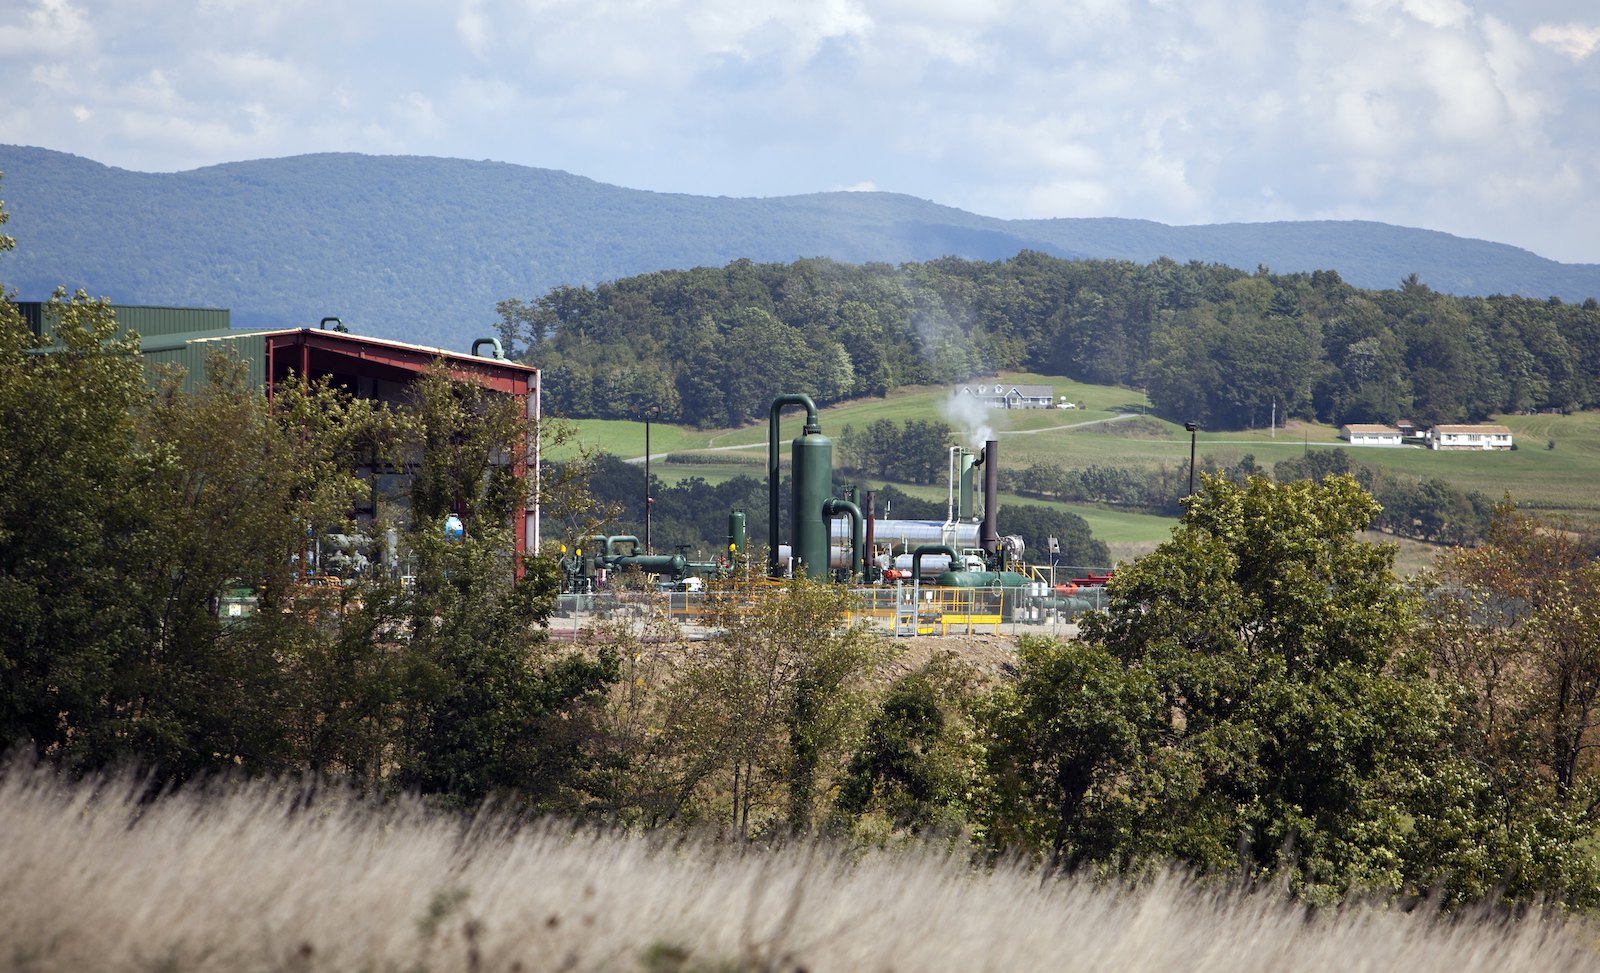 Penn Township in the Marcellus Shale